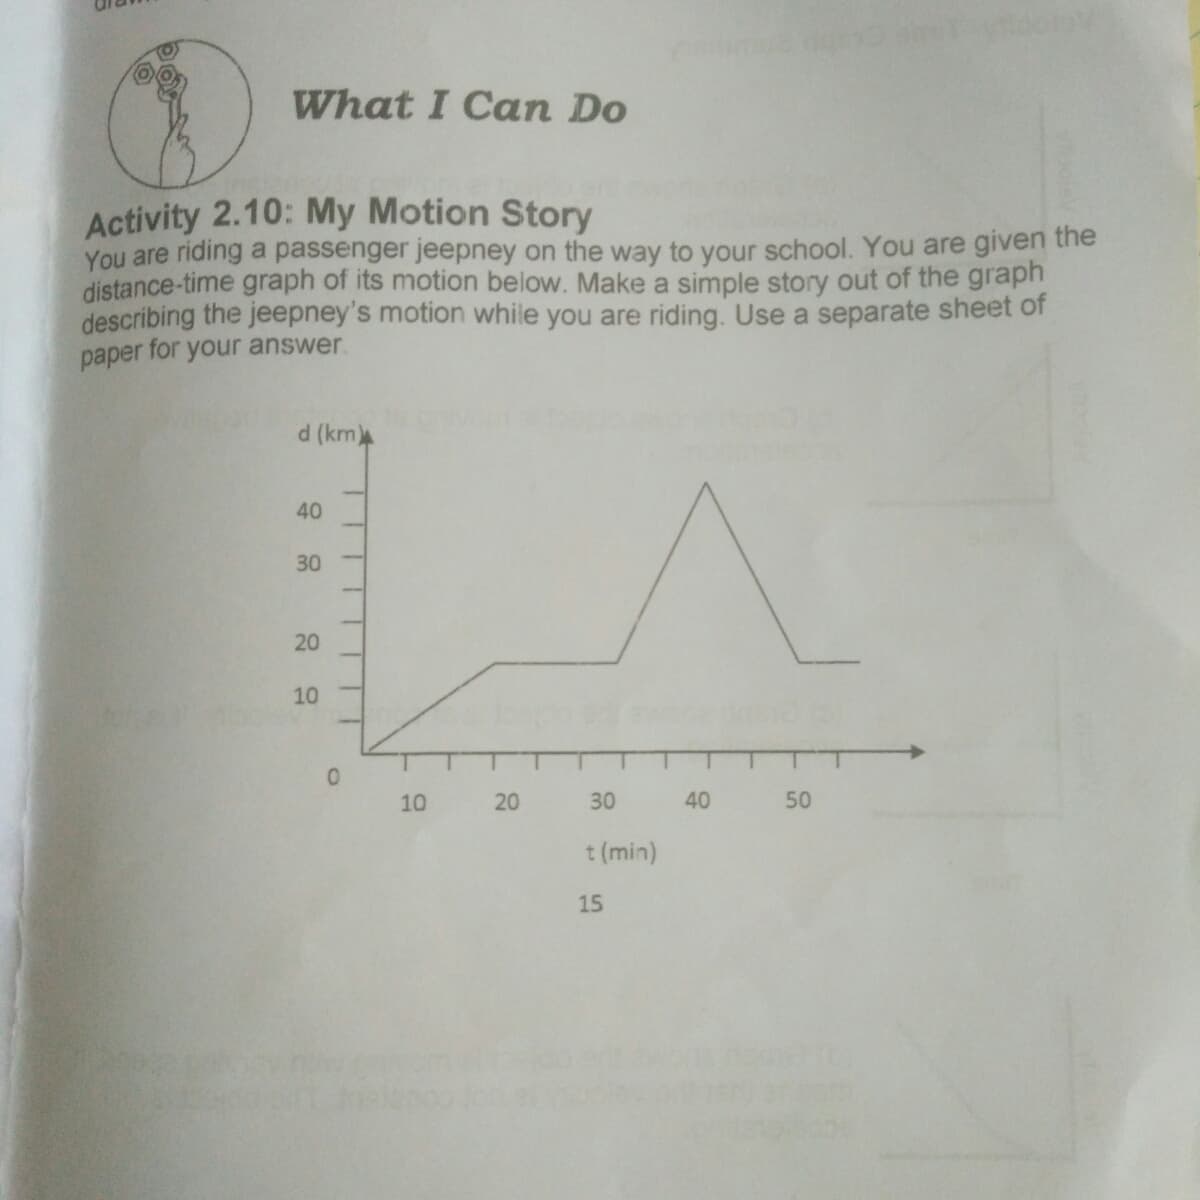 What I Can Do
Activity 2.10: My Motion Story
You are riding a passenger jeepney on the way to your school. You are given the
distance-time graph of its motion below. Make a simple story out of the graph
describing the jeepney's motion while you are riding. Use a separate sheet of
paper for your answer.
d (km
40
30
20
10
10
30
40
50
t (min)
15
20
